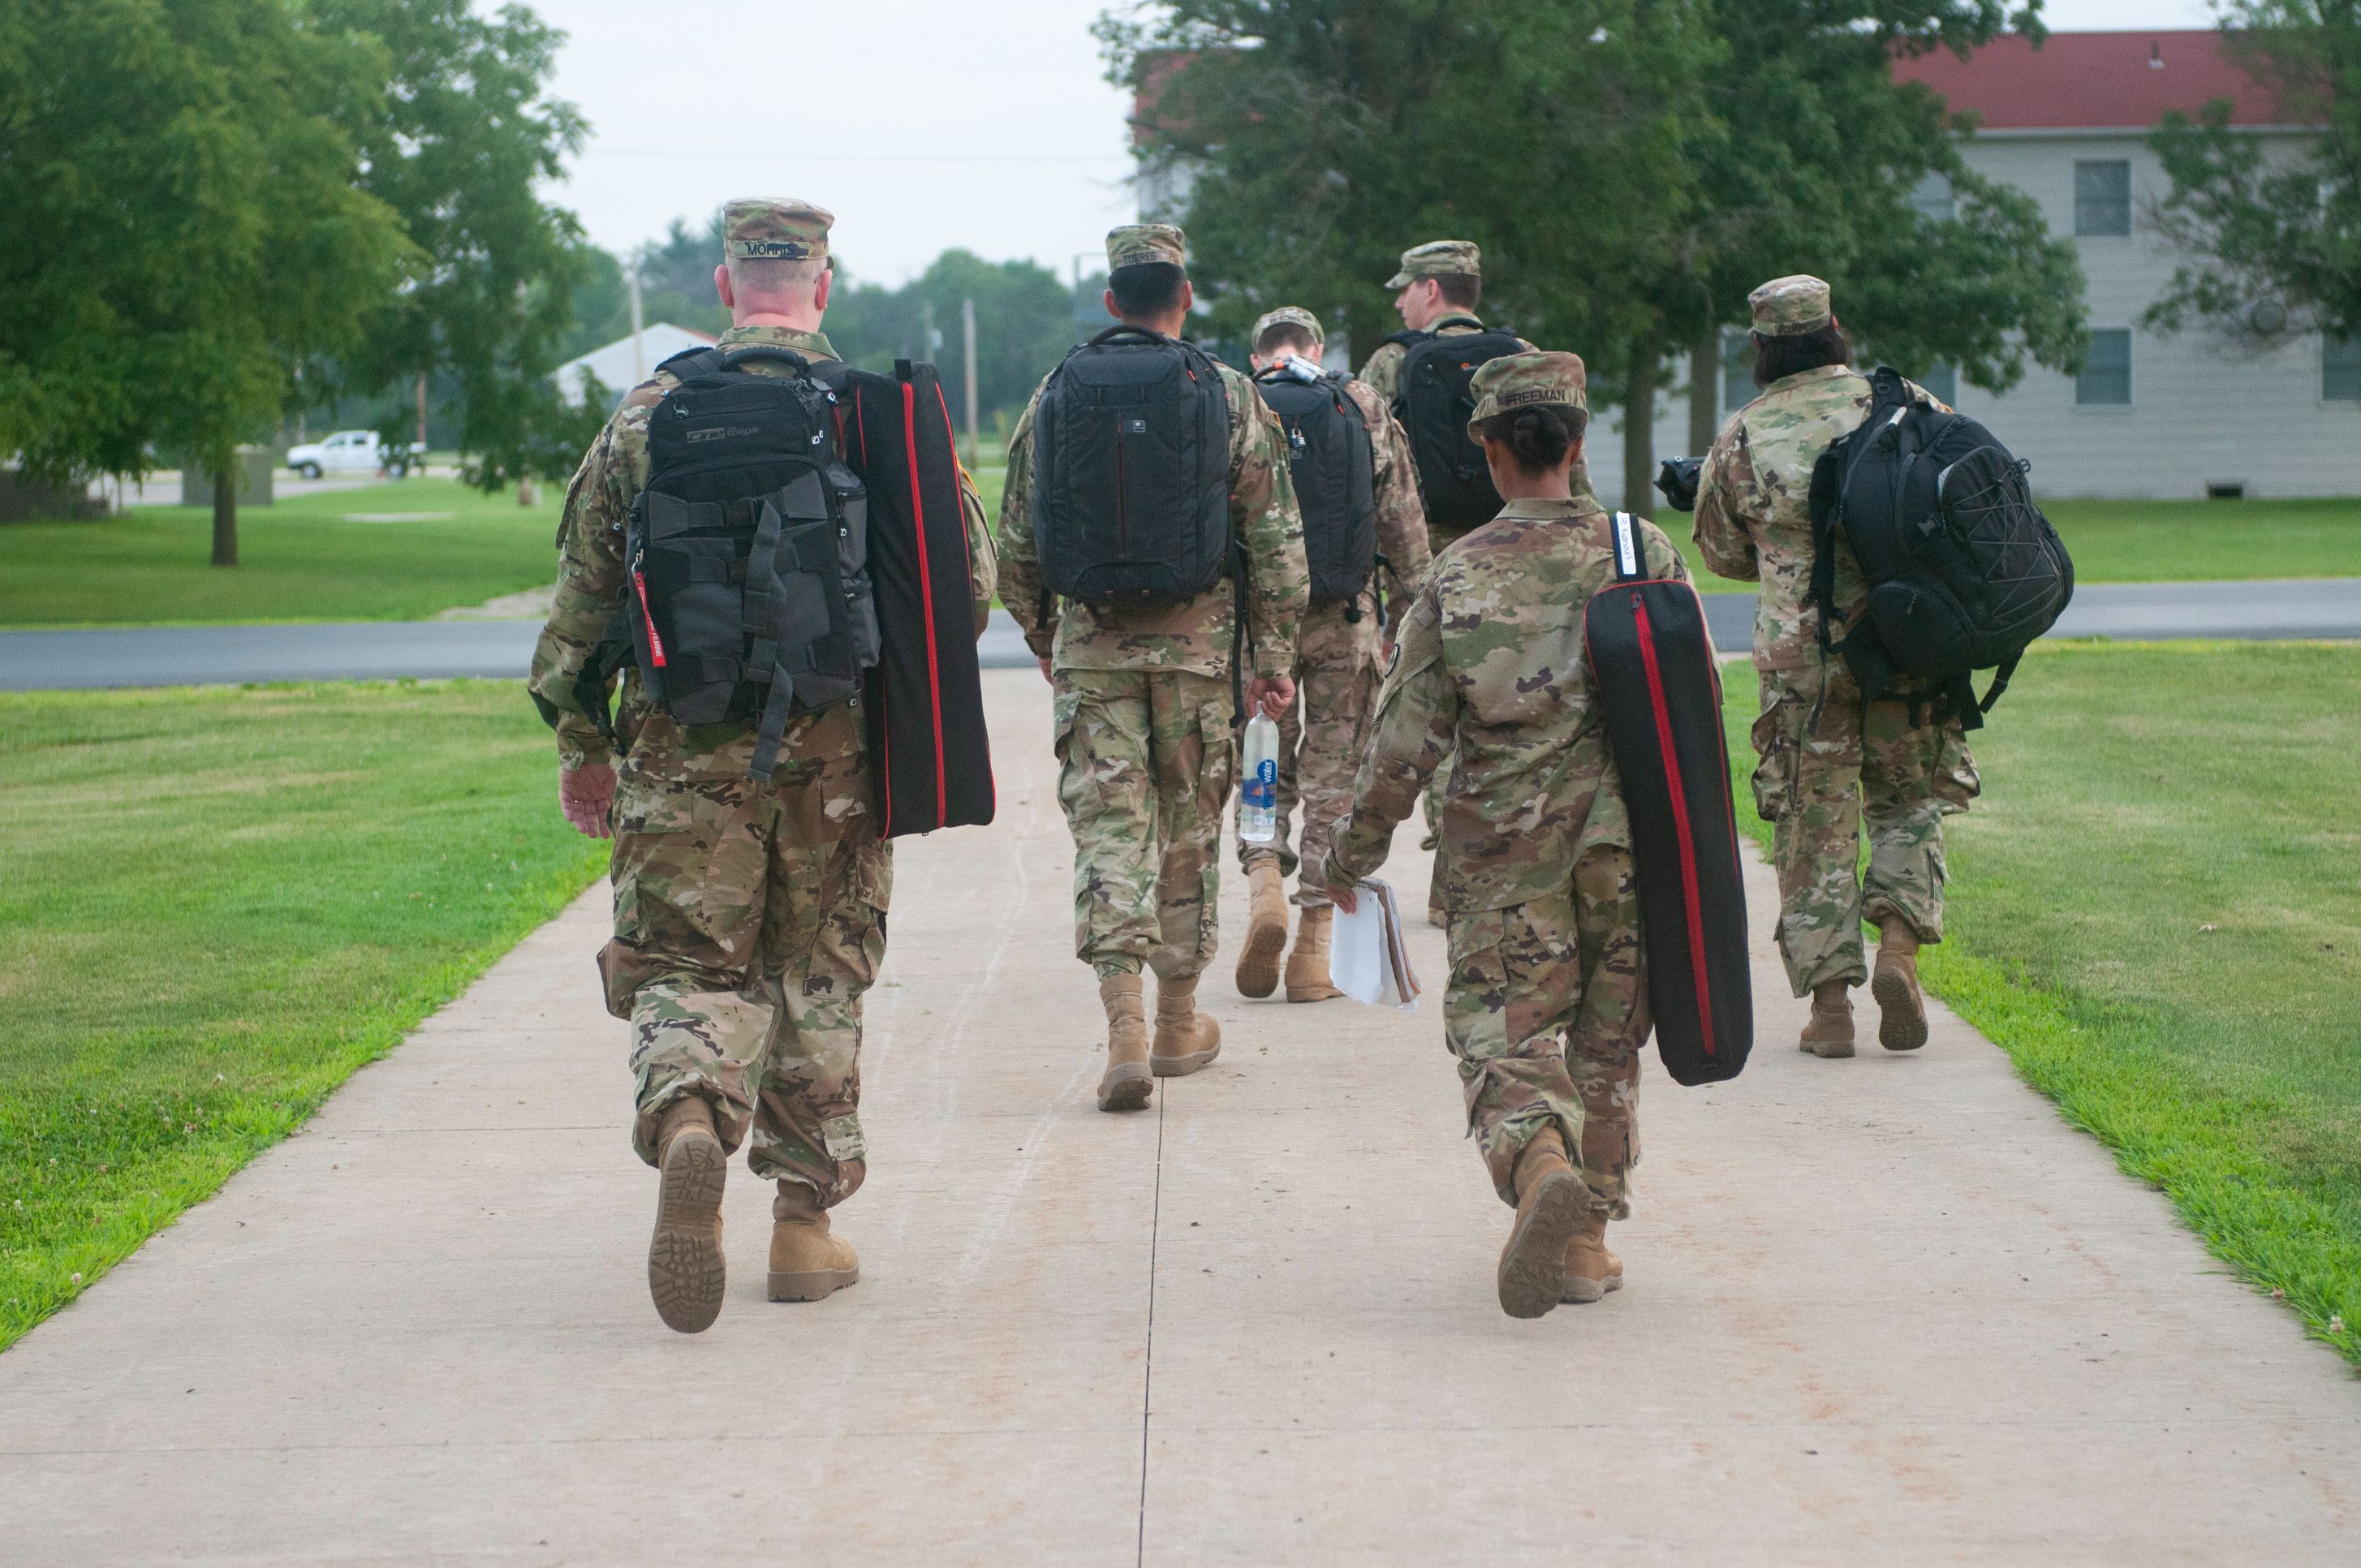 U.S. Army Reserve Public Affairs Soldiers head out to capture photos and videos as part of a training event called Task Force 46S, which is designed to train Army journalists, photographers and videographers into becoming mass communication specialists, at Fort McCoy, Wisconsin, July 20, 2019. (U.S. Army Reserve photo by Staff Sgt. Brigitte Morgan)